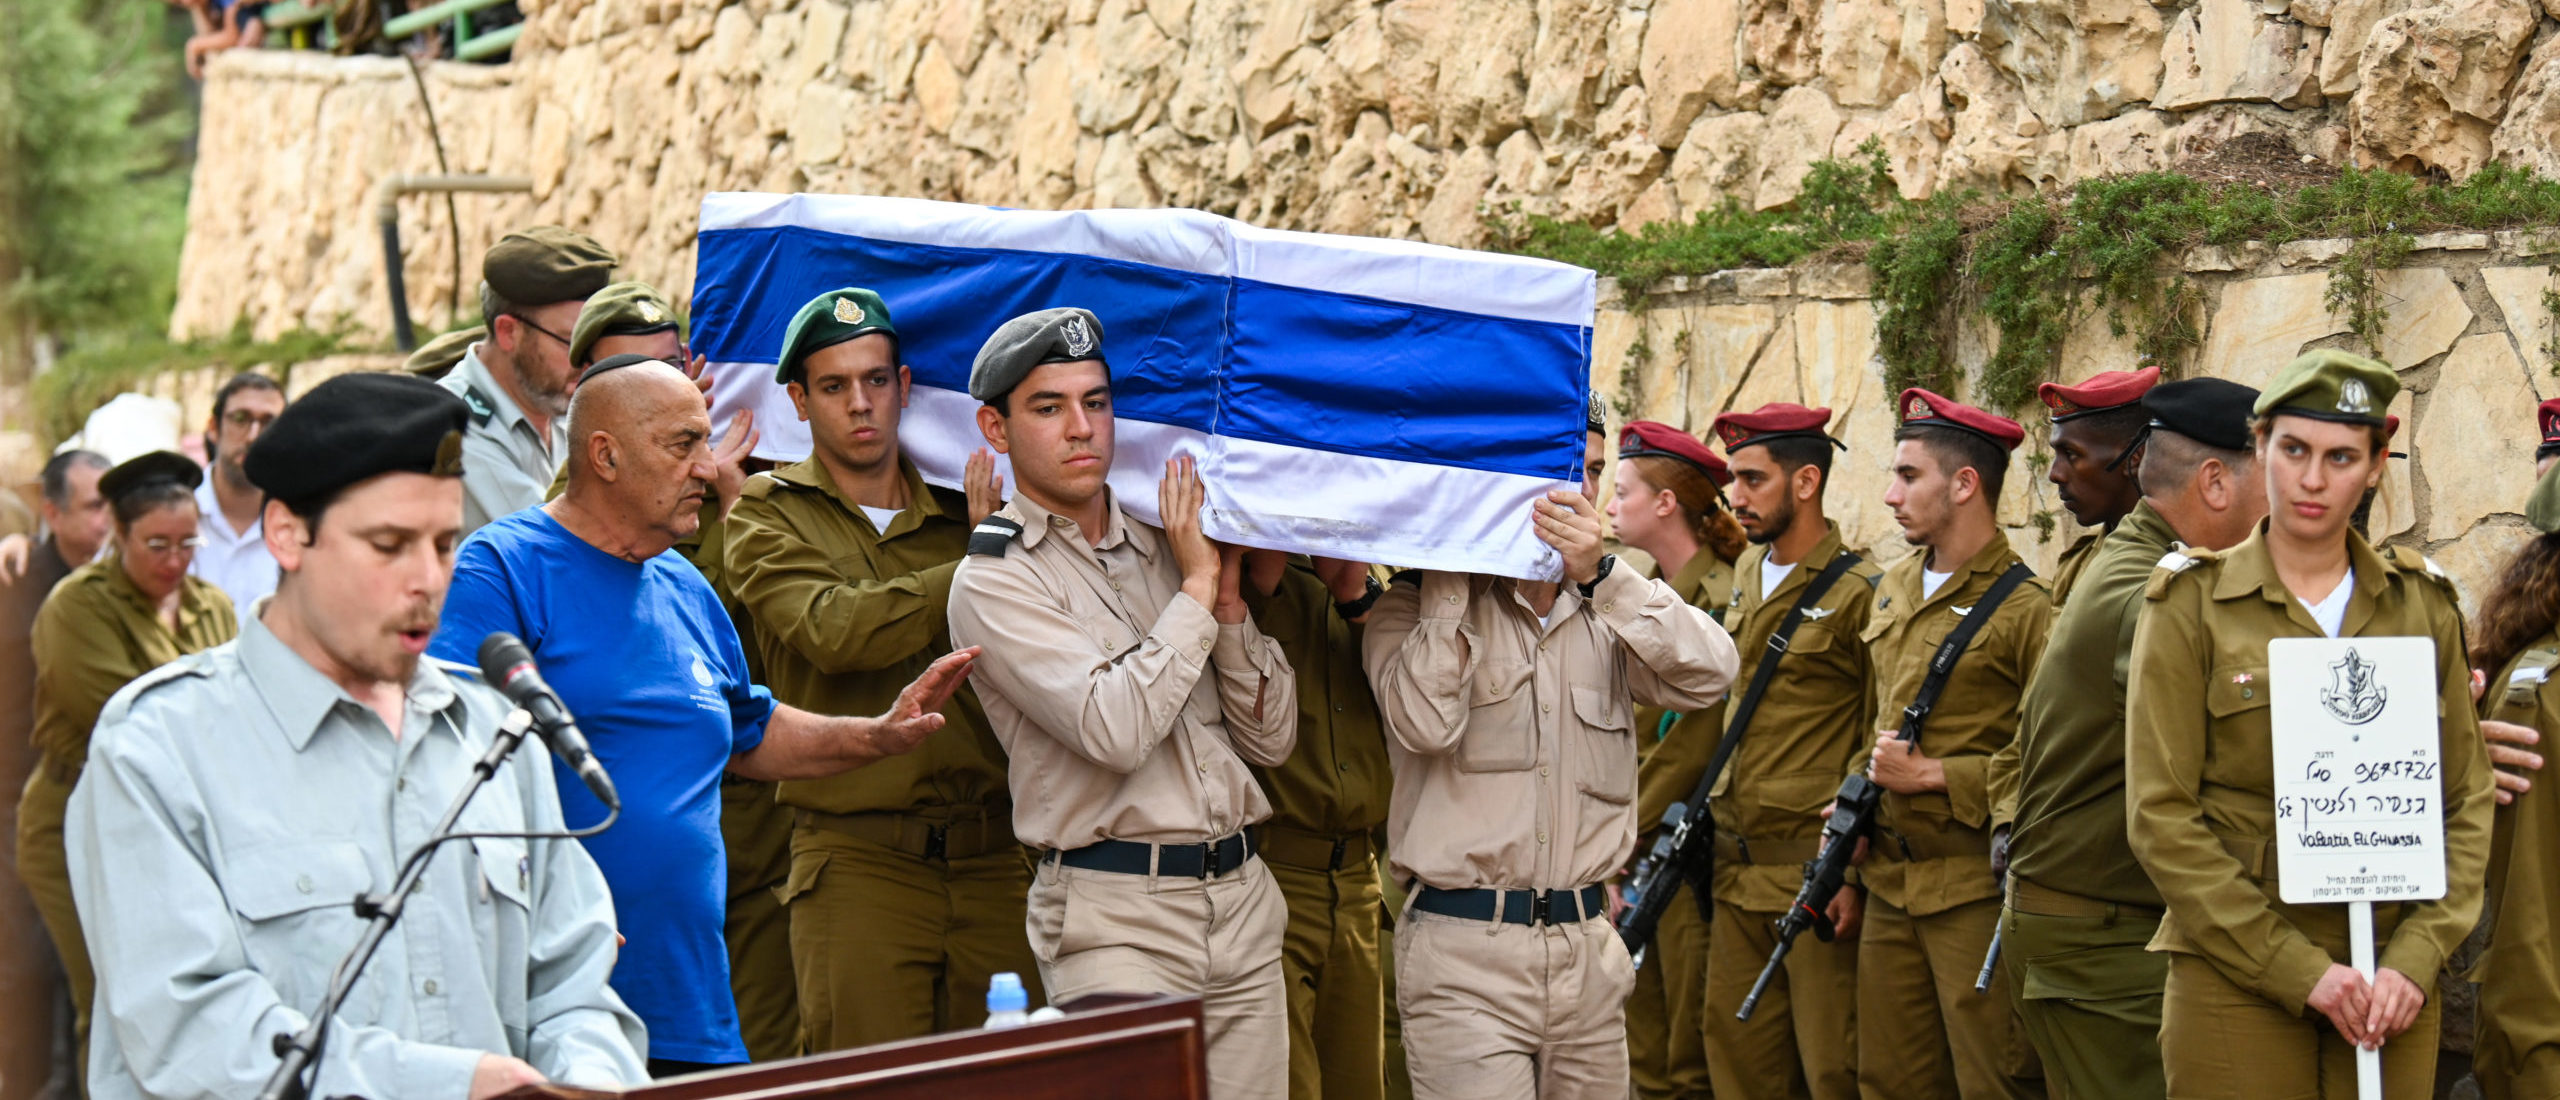 JERUSALEM, ISRAEL - OCTOBER 12: Soldiers carry the casket of Valentin (Eli) Ghnassia, 23, who was killed in a battle with Hamas militants at Kibbutz Be’eeri near the Israeli border with the Gaza Strip during his funeral on October 12, 2023 at Mount Herzl Military Cemetery in Jerusalem, Israel. Israel has sealed off Gaza and launched sustained retaliatory air strikes, which have killed at least 1,200 people with more than 300, 000 displaced, after a large-scale attack by Hamas. On October 7, the Palestinian militant group Hamas launched a surprise attack on Israel from Gaza by land, sea, and air, killing over 1,200 people and wounding around 2800. Israeli soldiers and civilians have also been taken hostage by Hamas and moved into Gaza. The attack prompted a declaration of war by Israeli Prime Minister Benjamin Netanyahu and the announcement of an emergency wartime government.